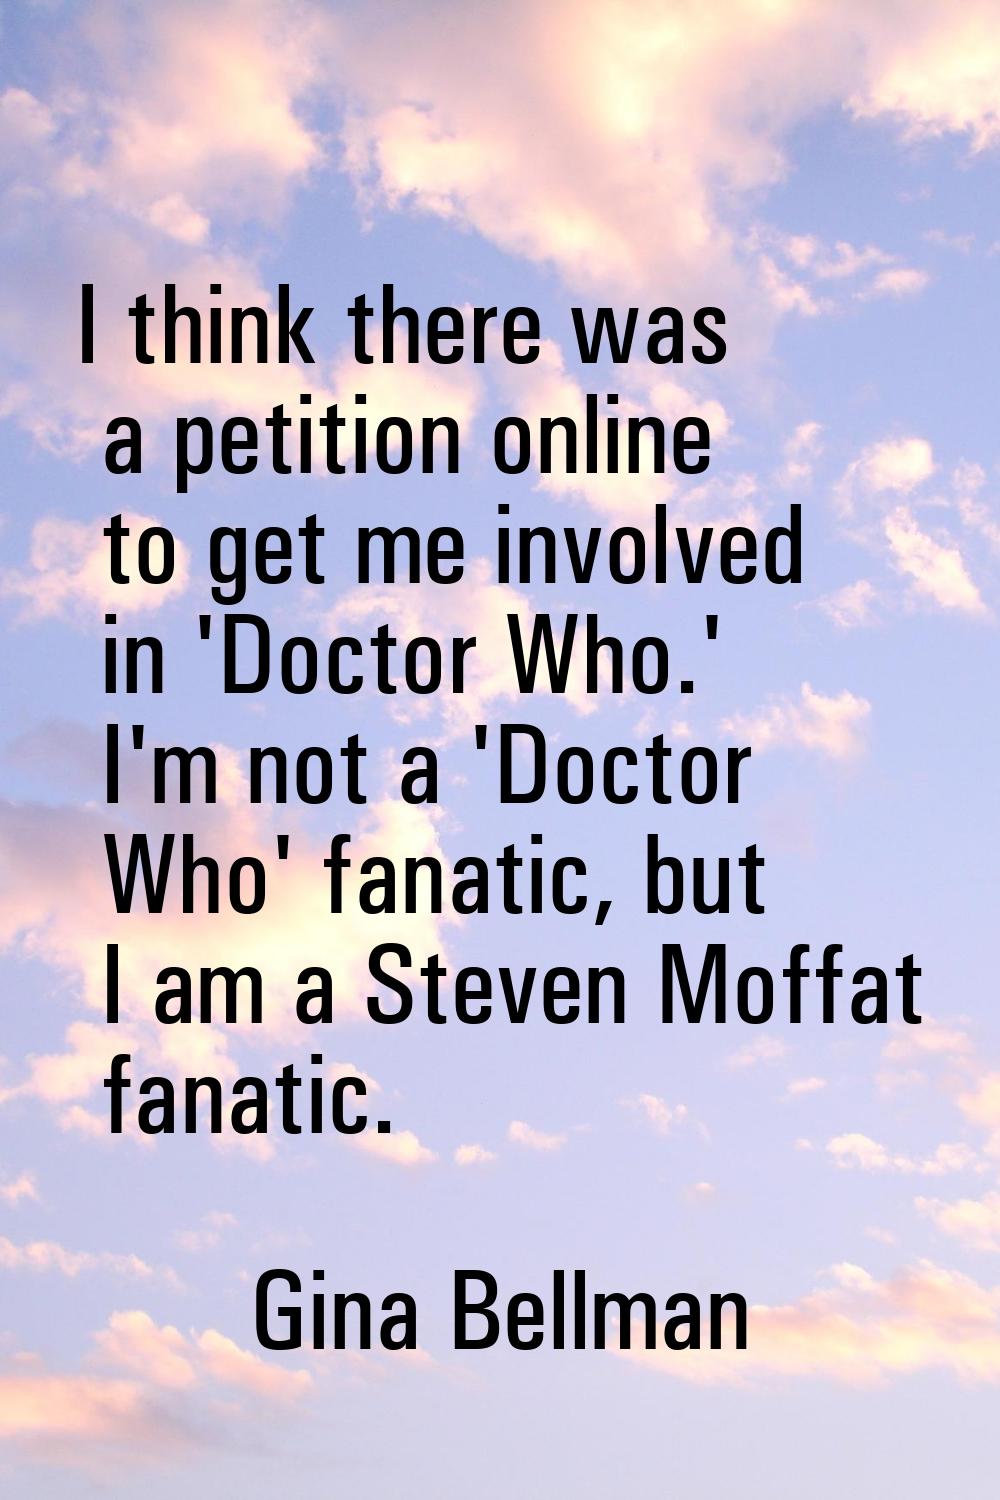 I think there was a petition online to get me involved in 'Doctor Who.' I'm not a 'Doctor Who' fana